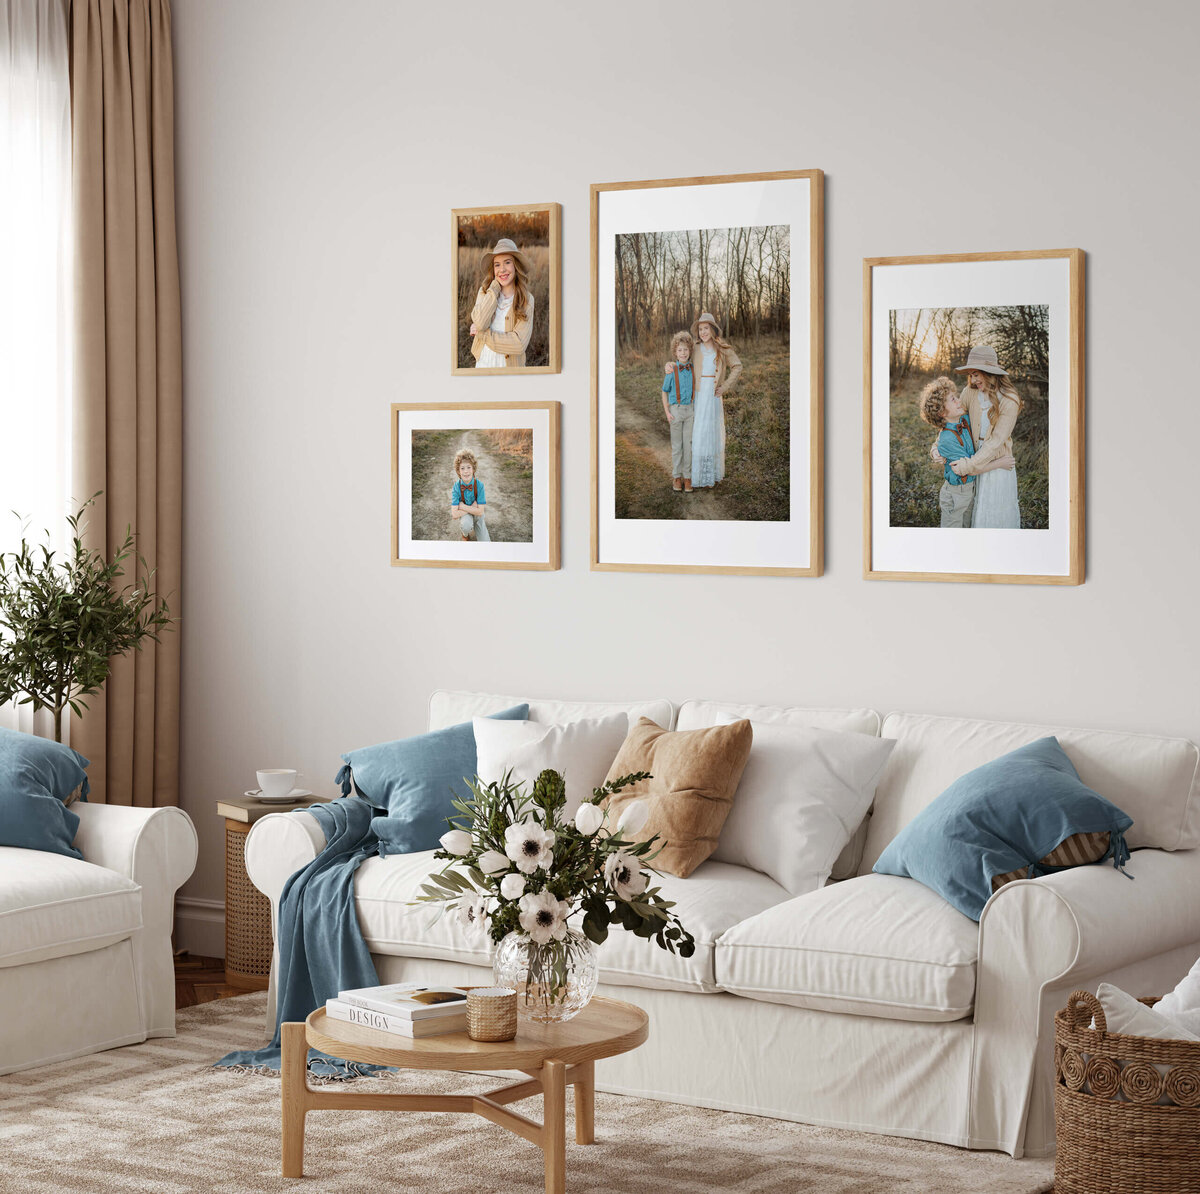 interior view of a living room with framed wall art from a St. louis Photographer